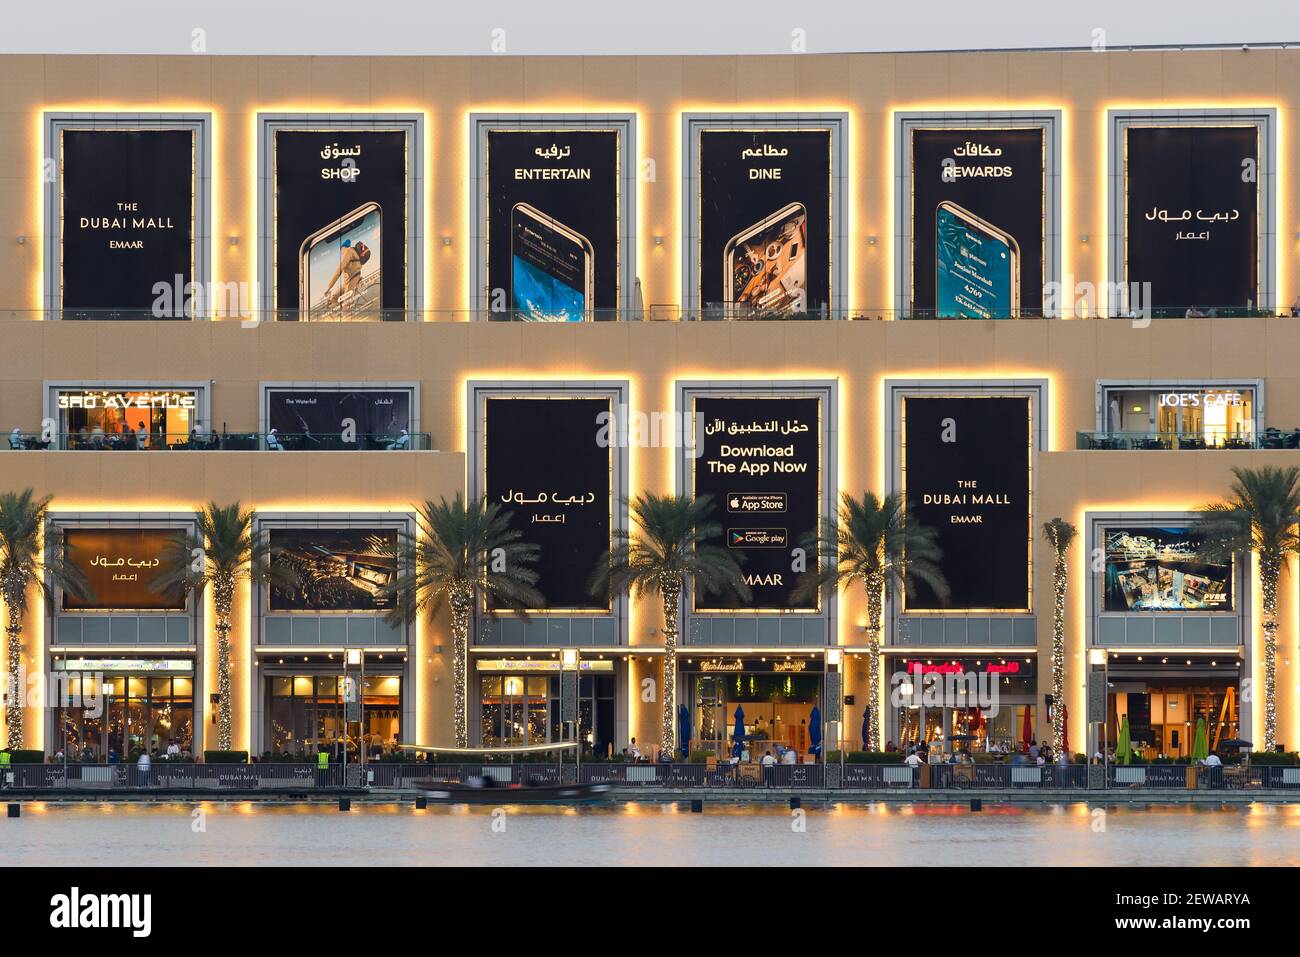 The Dubai Mall facade, the largest shopping mall in the world, located in Dubai, United Arab Emirates. Exterior view of Emaar luxury Property. Stock Photo